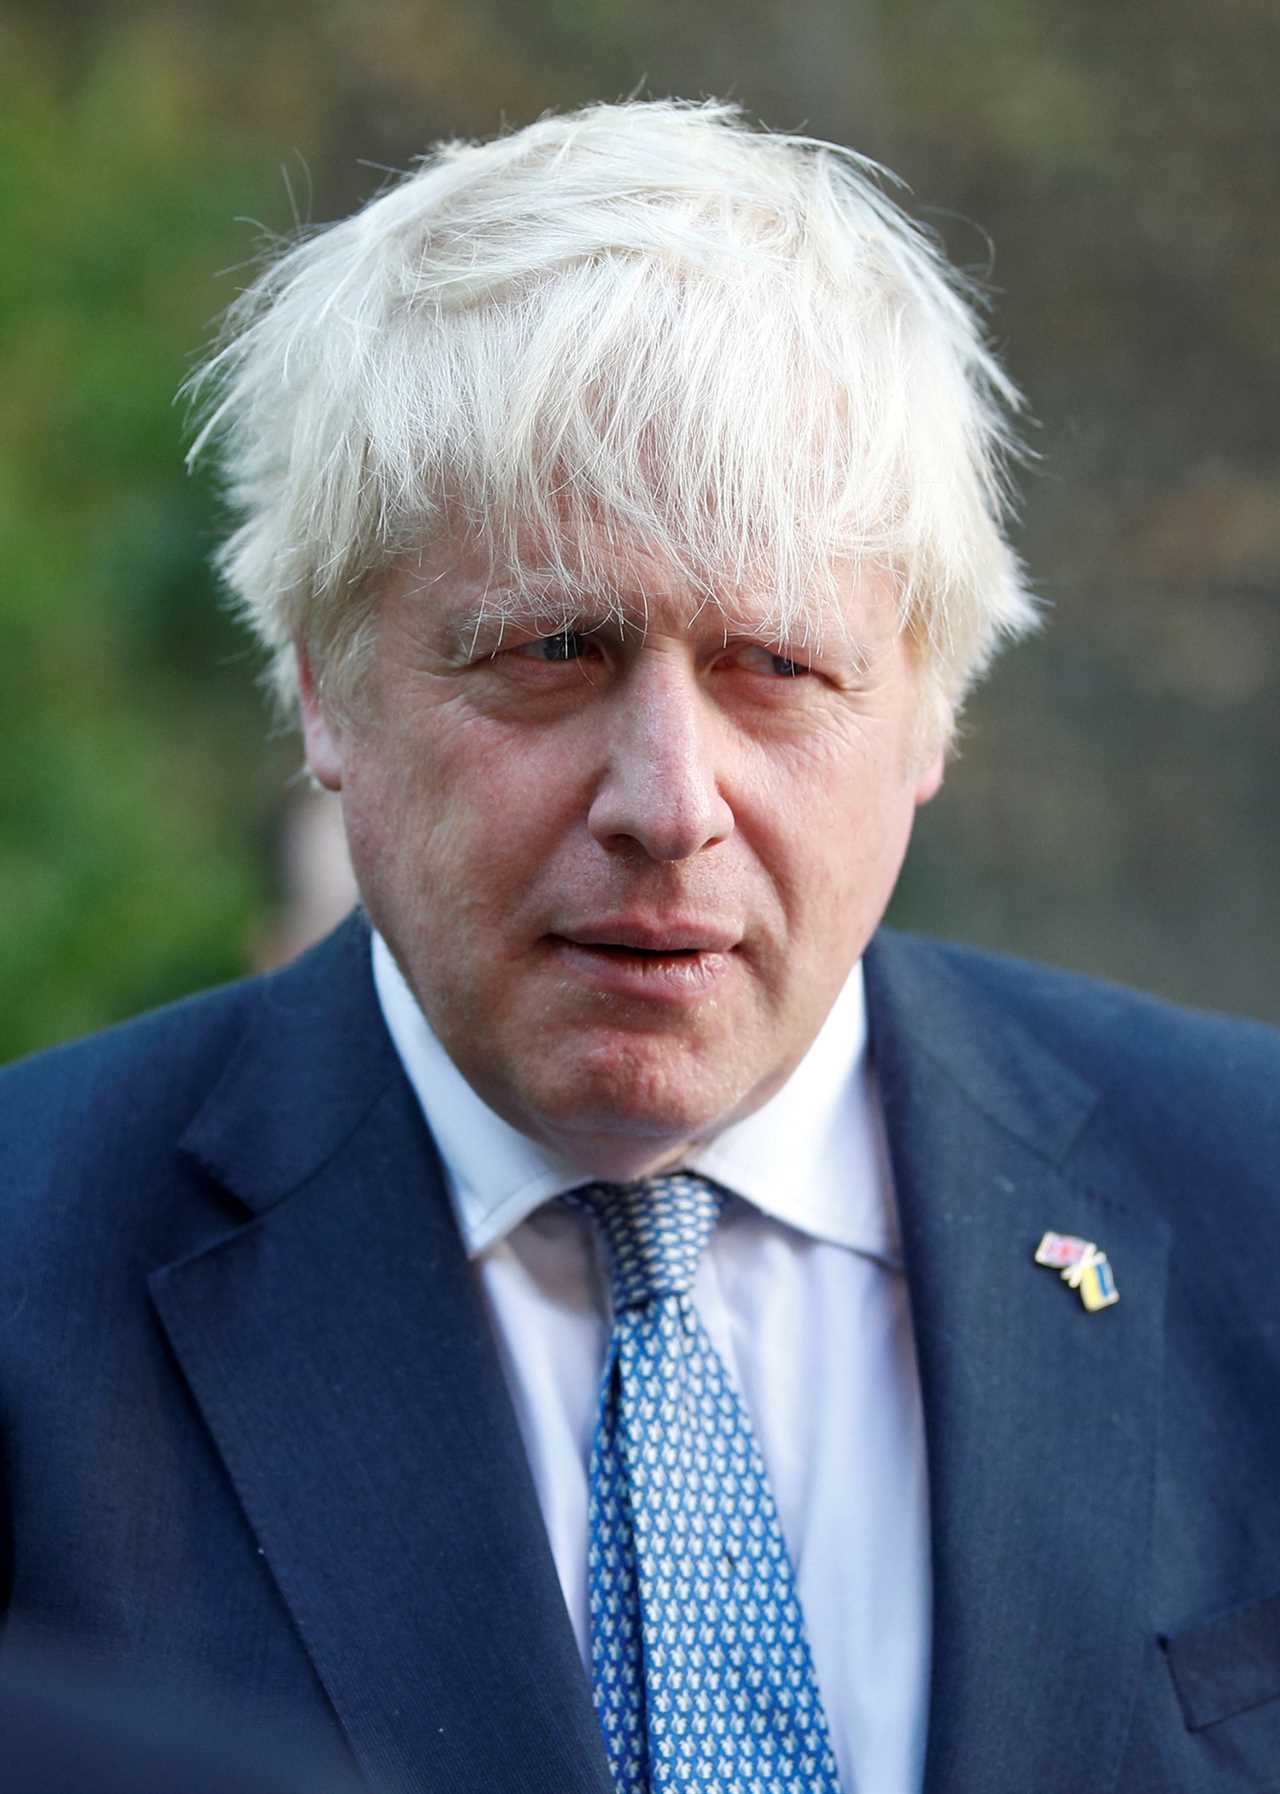 Tories face multiple sleaze probes after Boris Johnson hit by fresh claims over personal finances